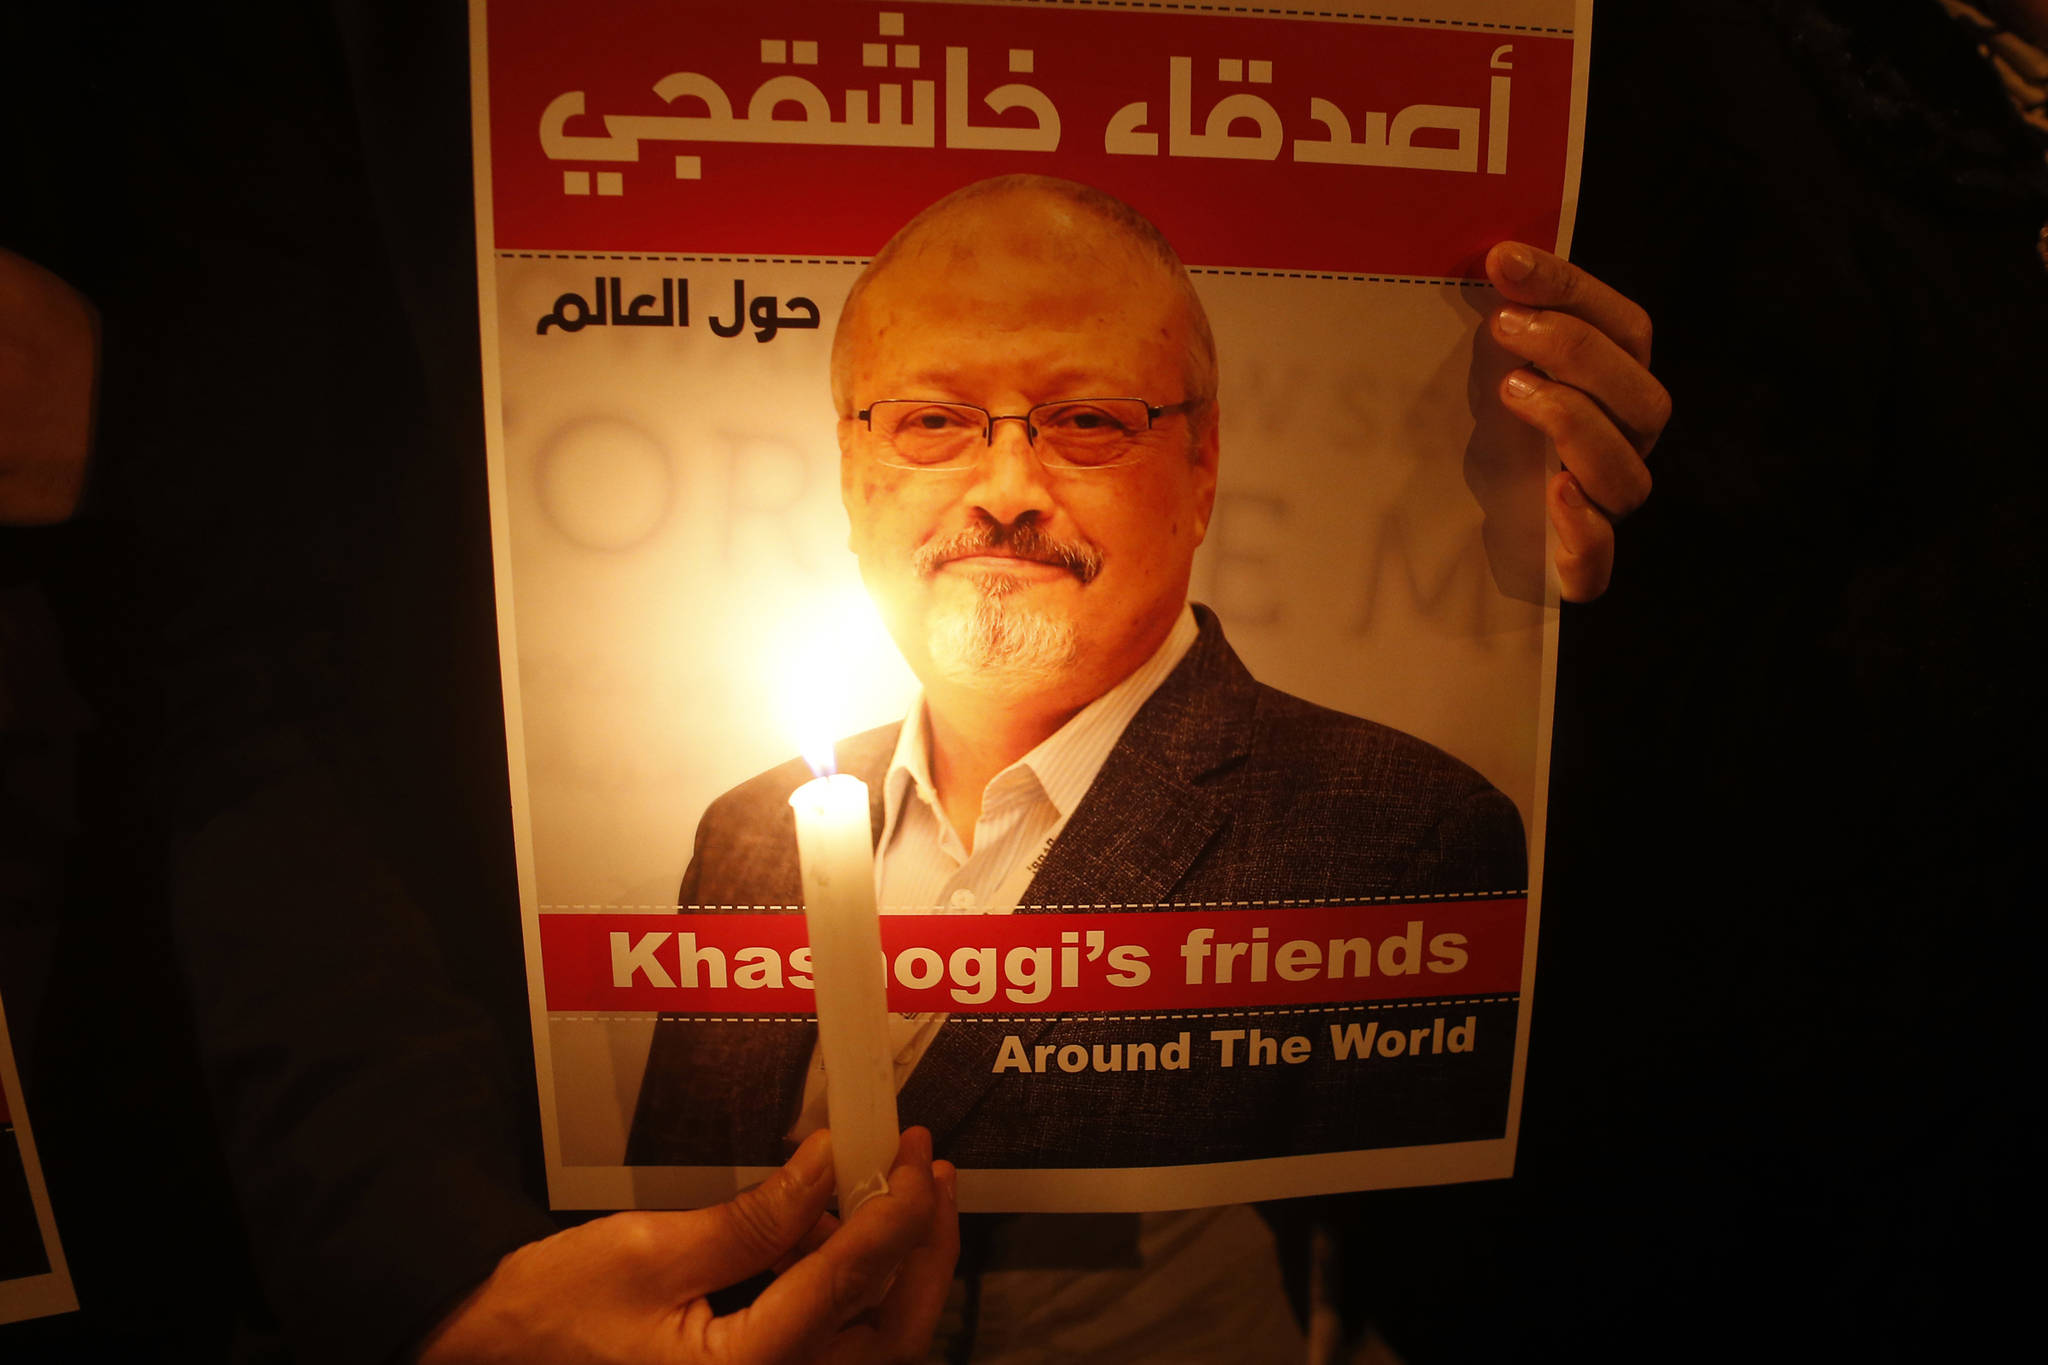 Activists, protesting the killing of Saudi journalist Jamal Khashoggi, hold a candlelight vigil outside Saudi Arabia’s consulate in Istanbul, Thursday, Oct. 25, 2018. The poster reads in Arabic:’ Khashoggi’s Friends Around the World’. A group of Arab and international public, political and media figures are establishing a global association called “Khashoggi’s Friends Around the World”; “to achieve justice for the freedom martyr”. (Lefteris Pitarakis | The Associated Press)